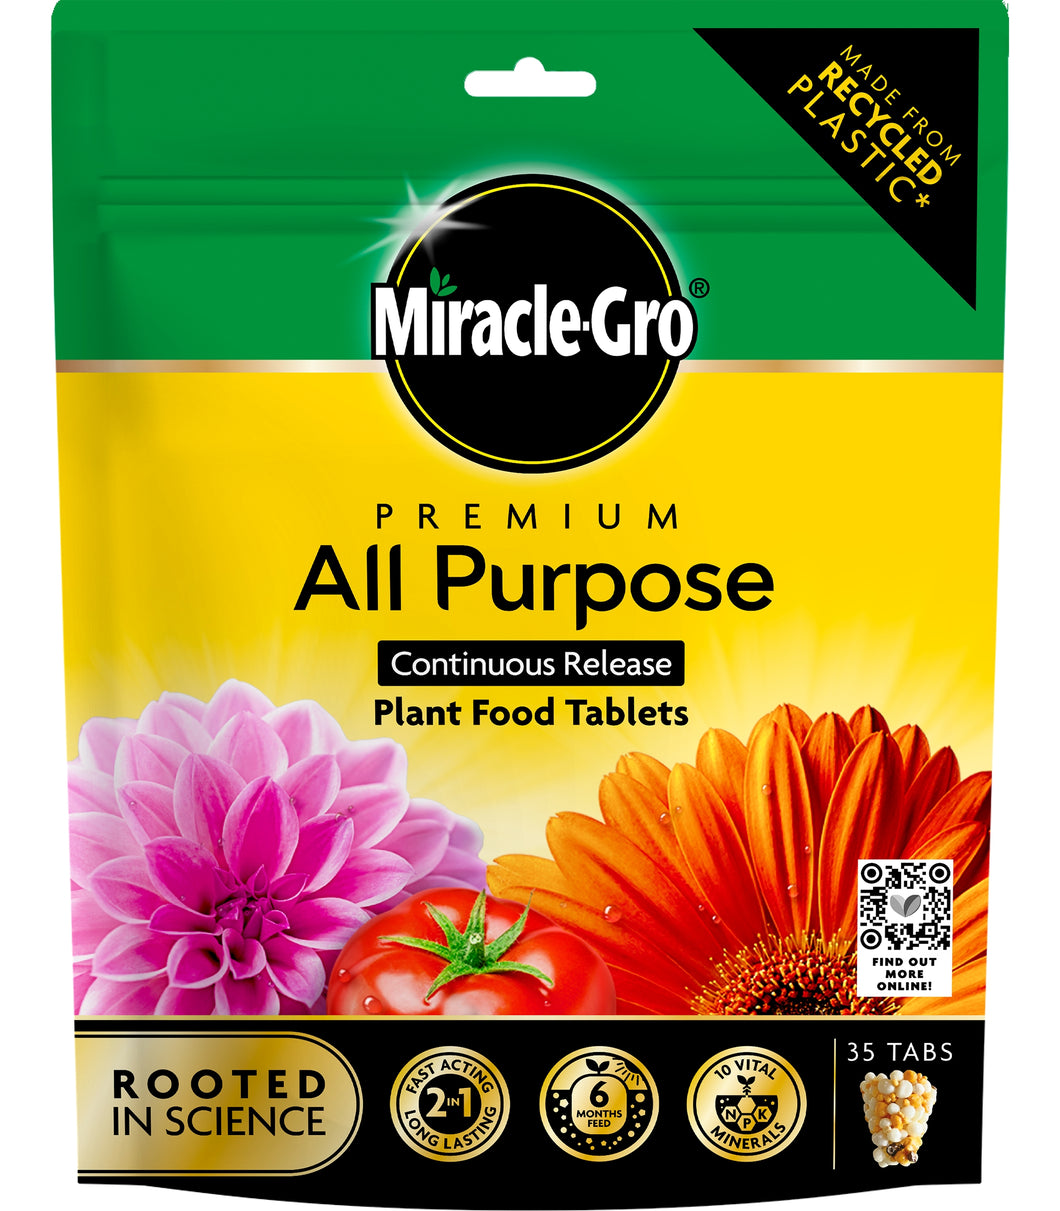 MIRACLE-GRO® PREMIUM ALL PURPOSE CONTINUOUS RELEASE PLANT FOOD TABLETS